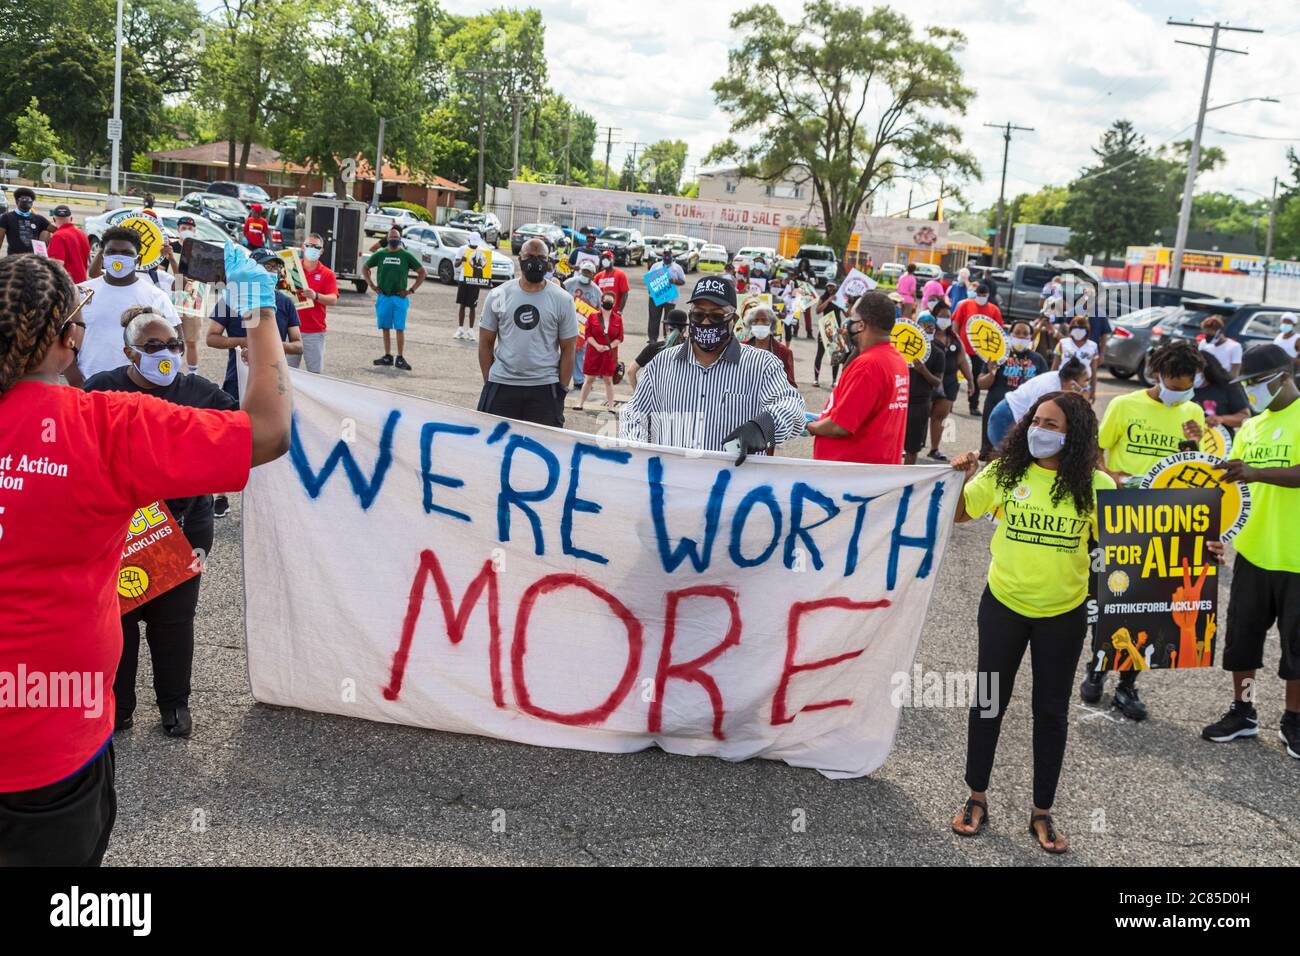 Detroit, Michigan, USA. 20th July, 2020. Fast food workers and supporters rally outside a McDonald's restaurant during the nationwide 'Strike for Black Lives.' The Service Employees International Union is calling for a $15 wage in the fast food industry. Credit: Jim West/Alamy Live News Stock Photo